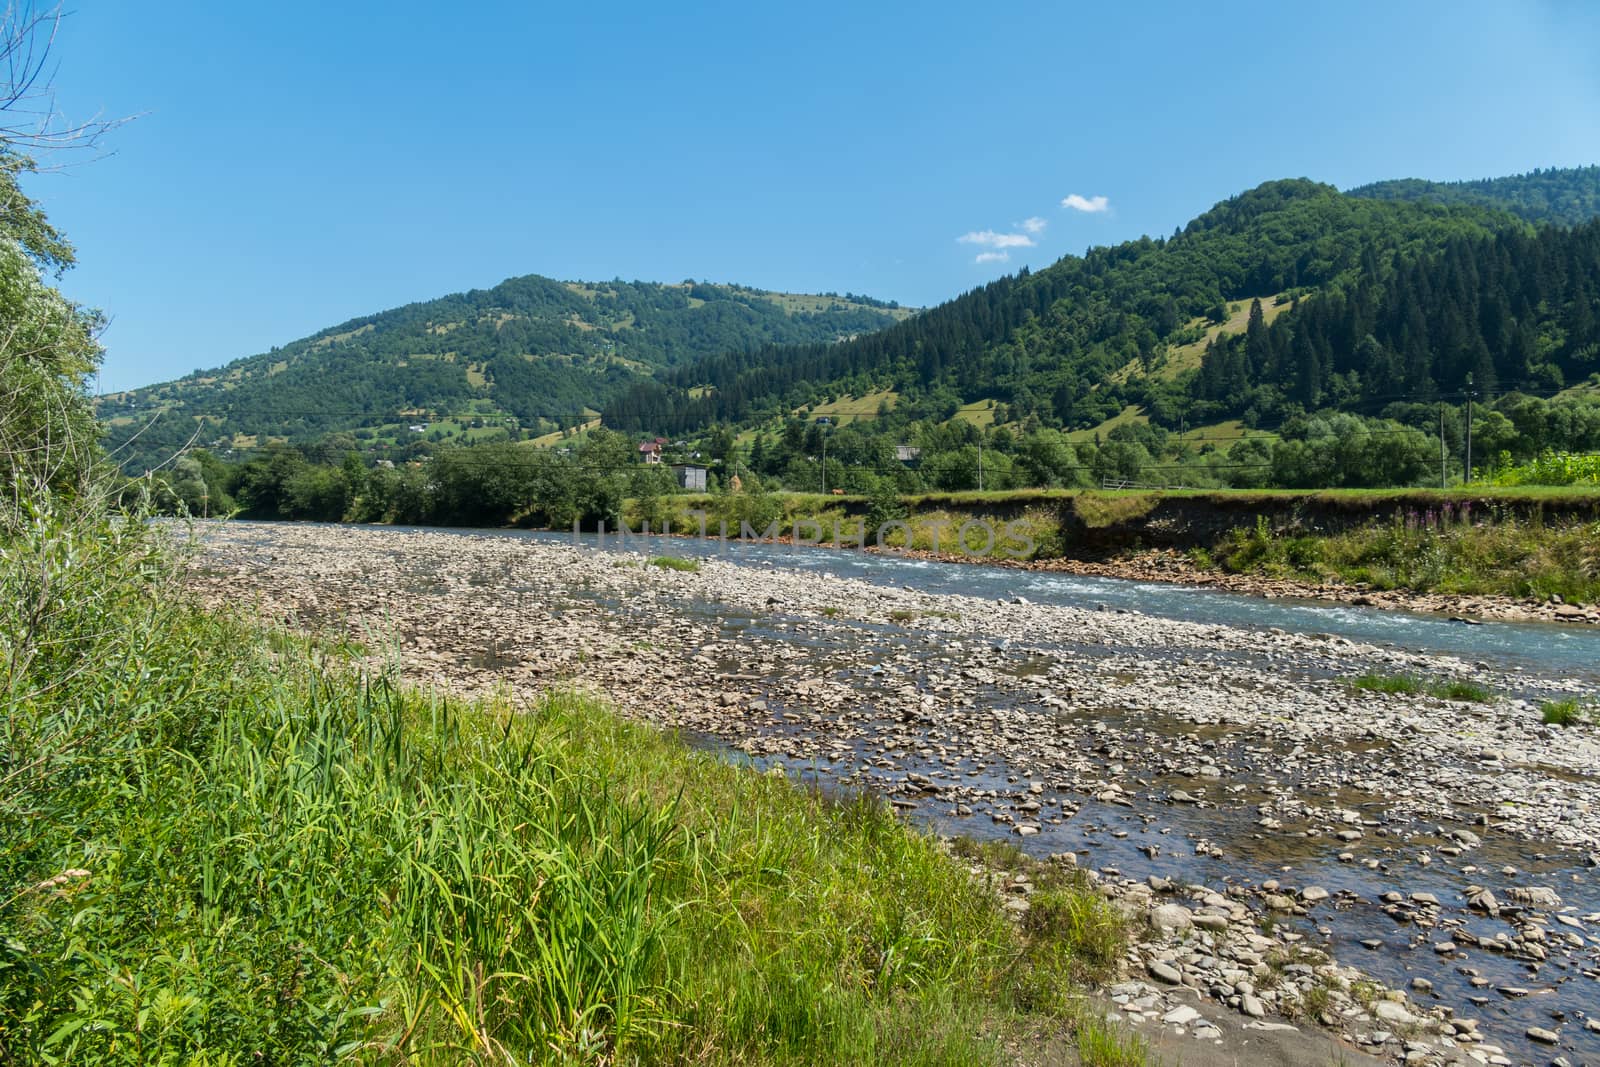 A picturesque view of a shallow mountain river against the backdrop of a beautiful rural village by Adamchuk